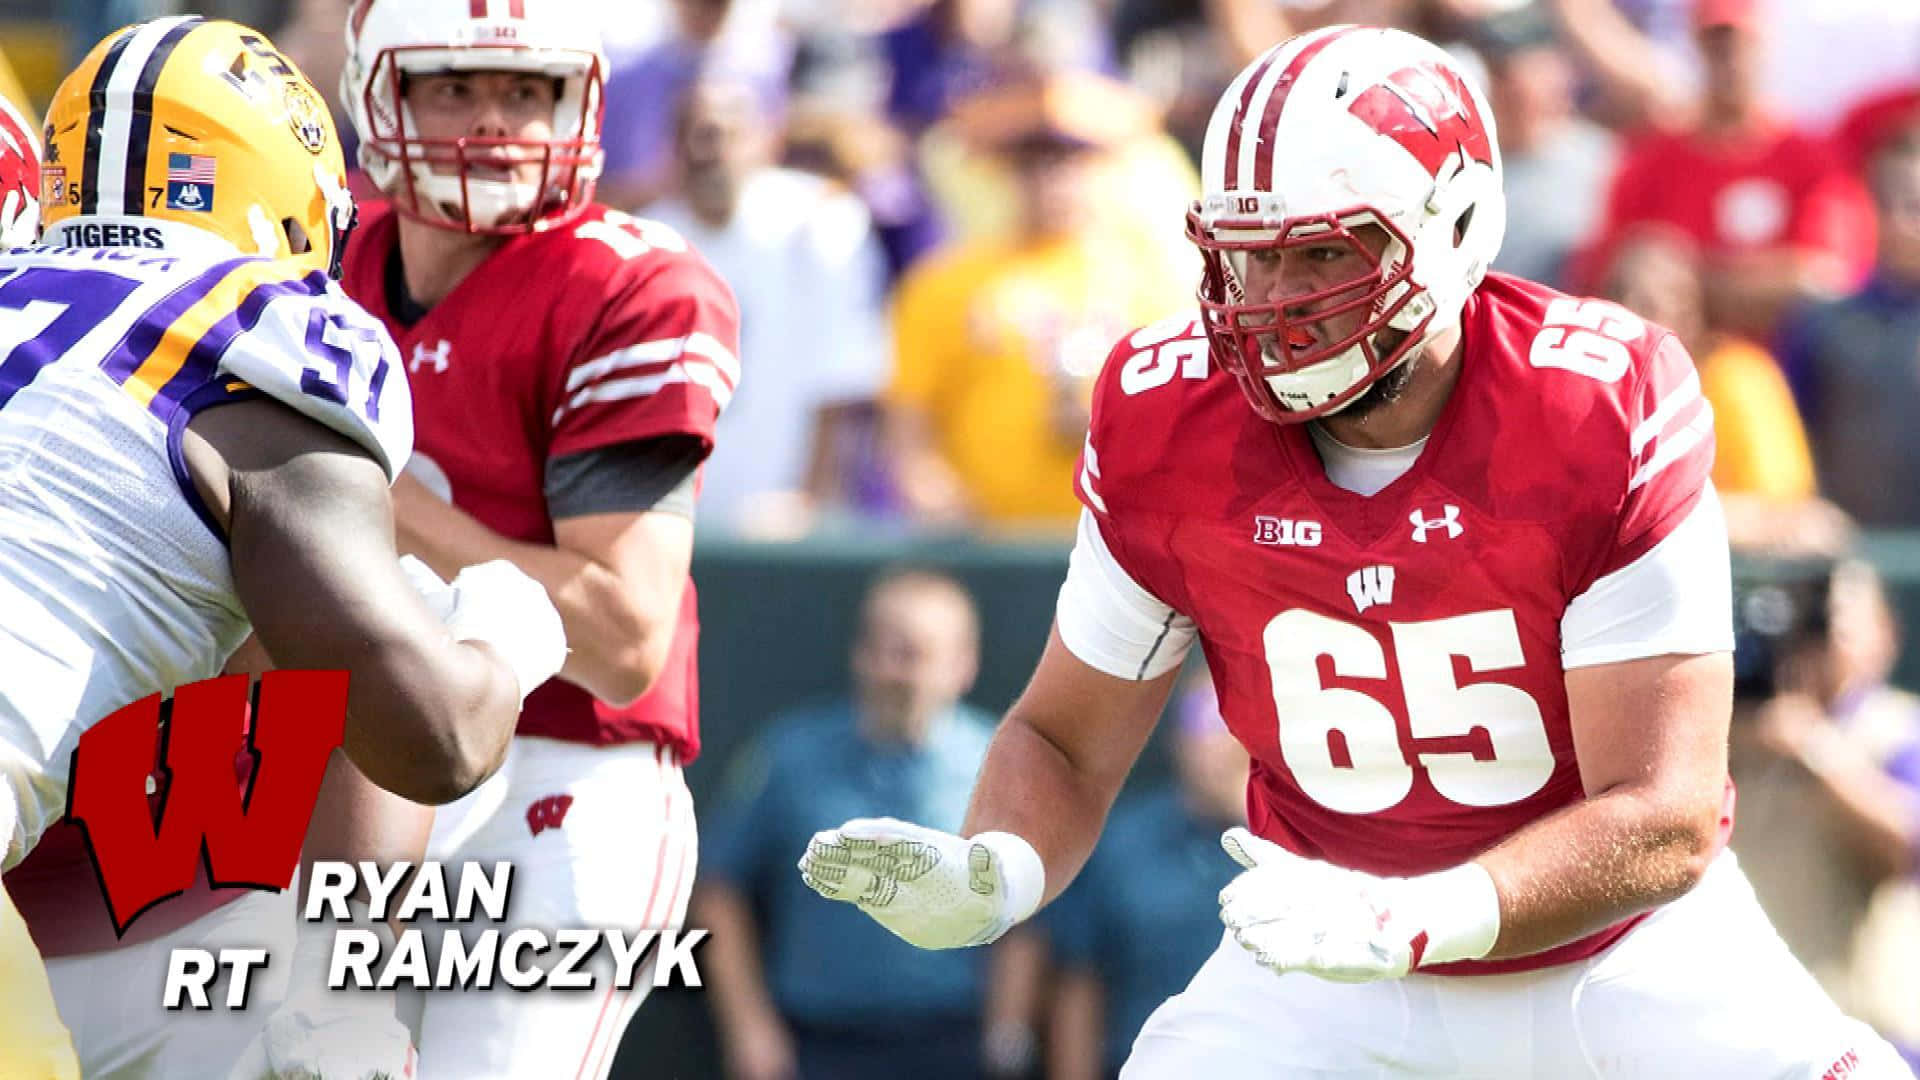 American College Football Player Ryan Ramczyk 2016 Game Wallpaper